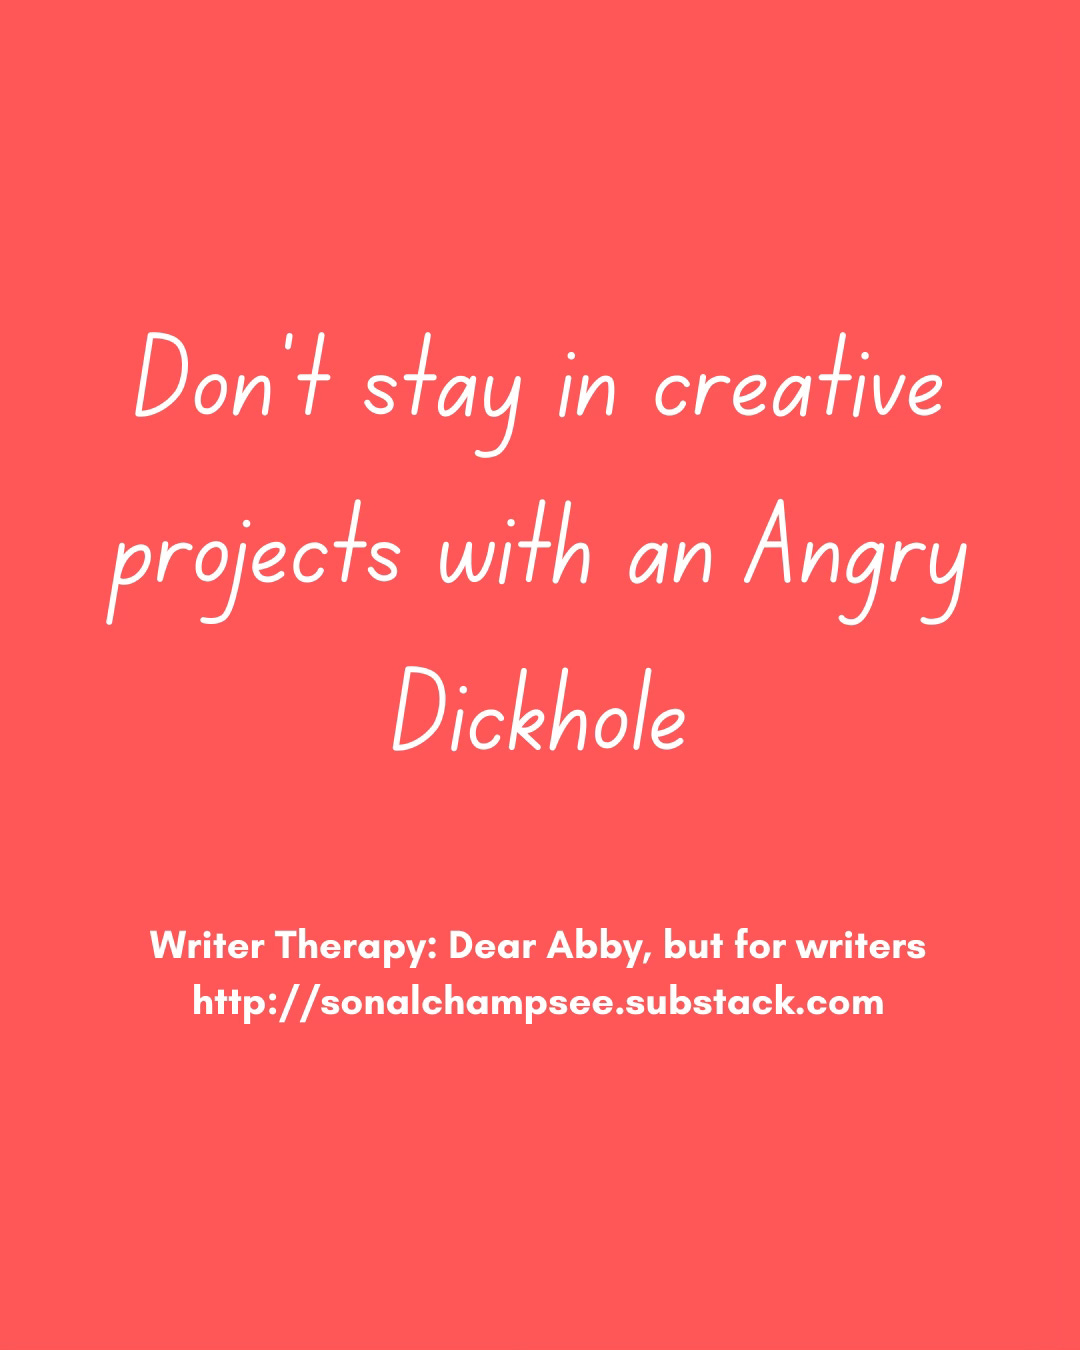 Don't stay in creative projects with an Angry Dickhole